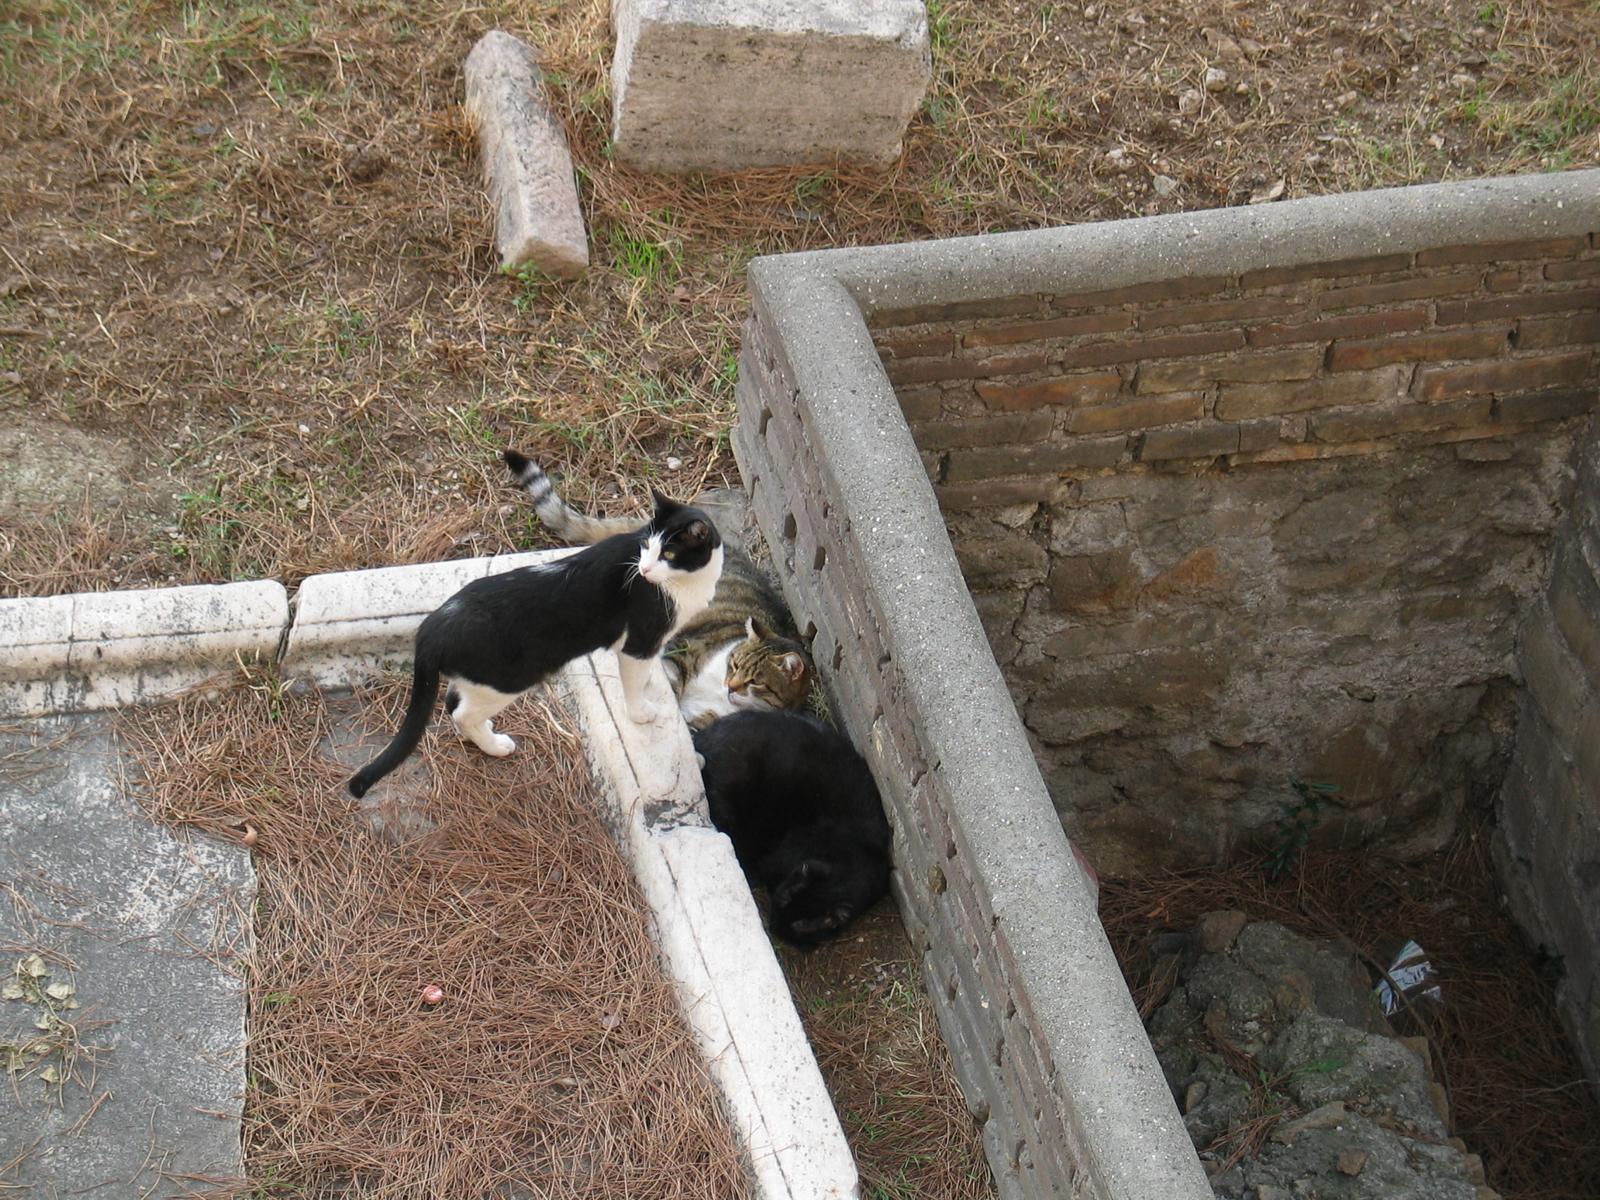 Cats in the sanctuary